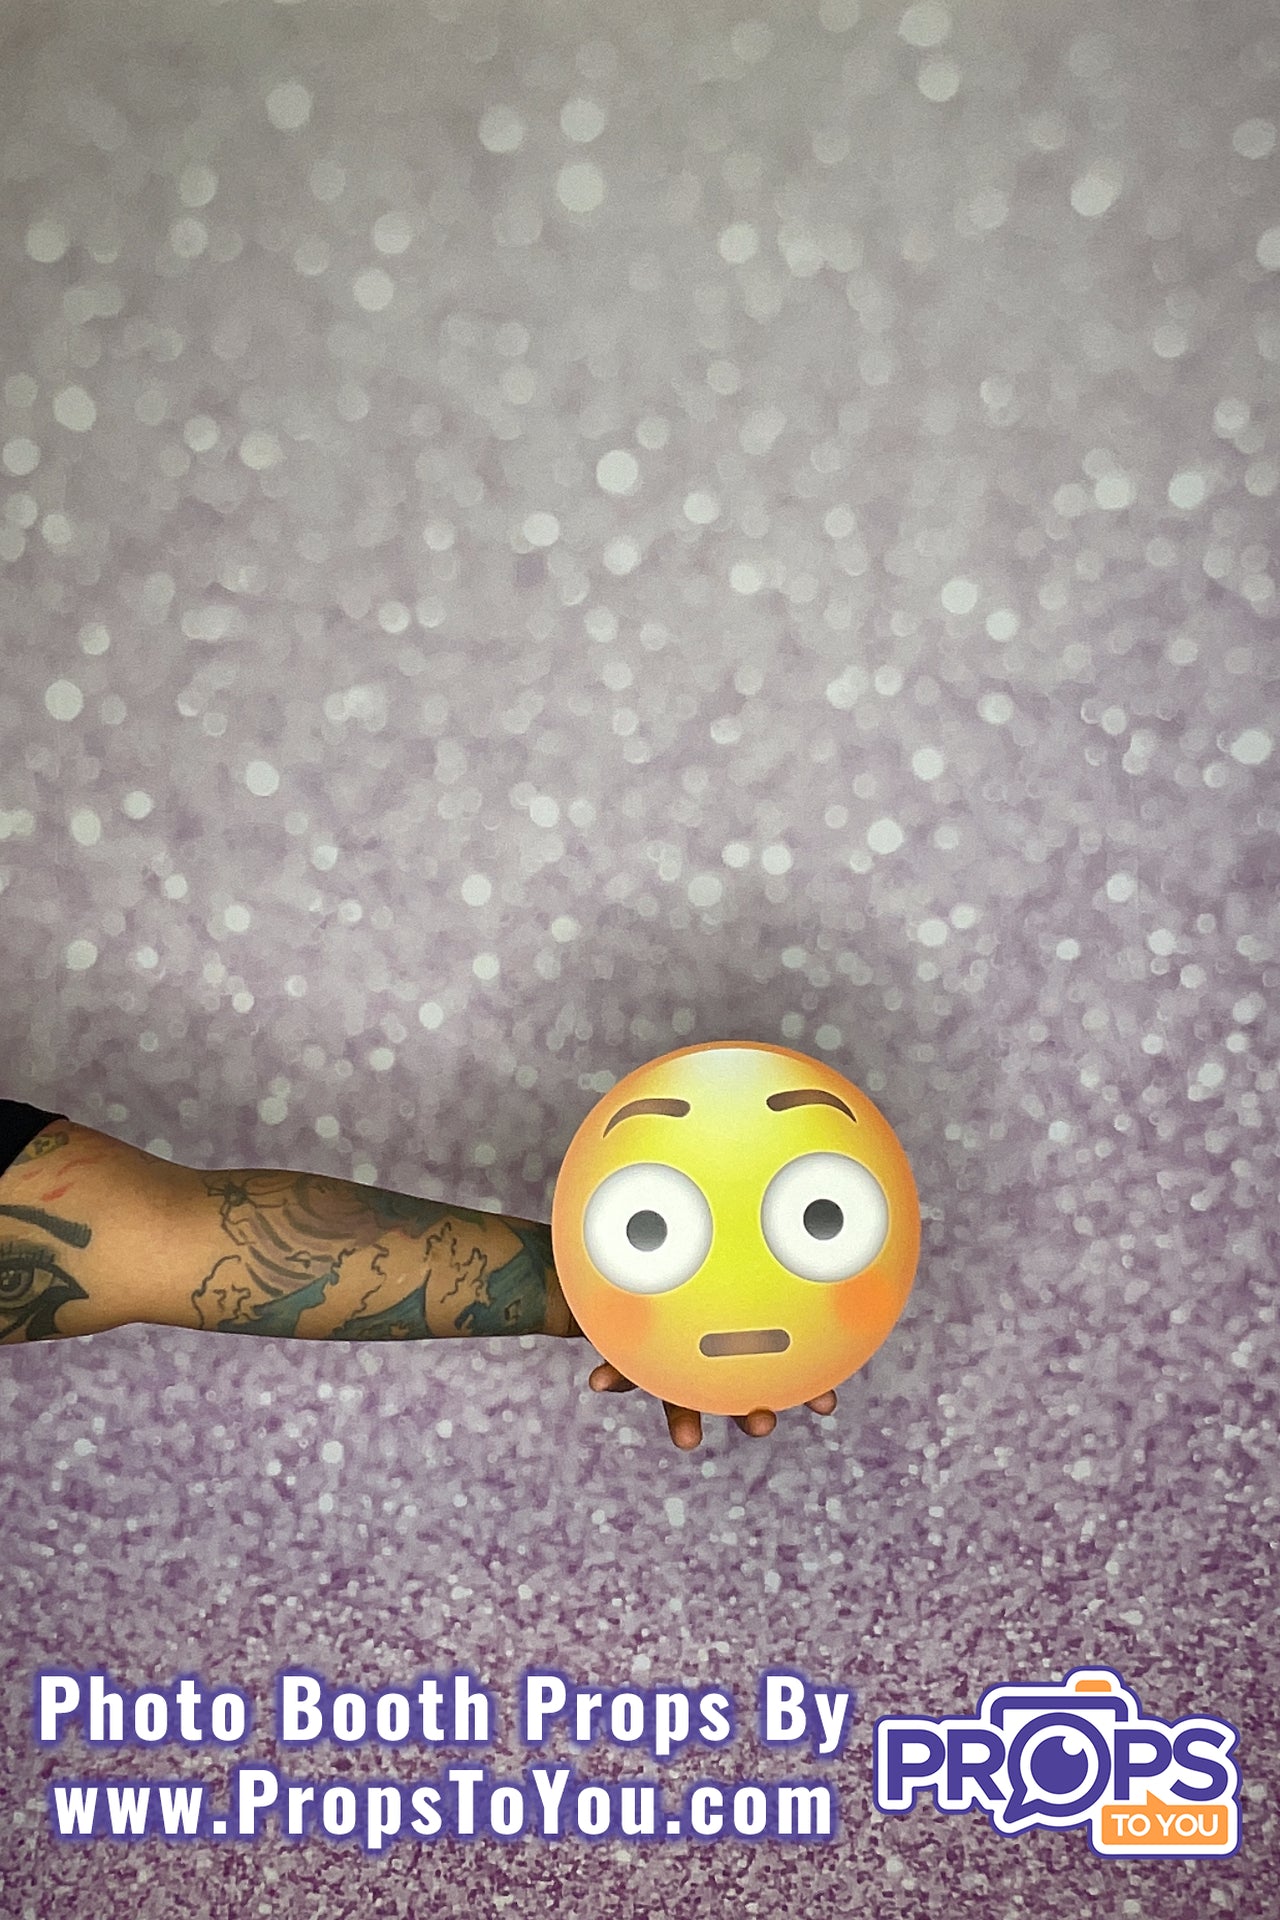 Emoji 3: Bundle 5 Double-Sided Photo Booth Props